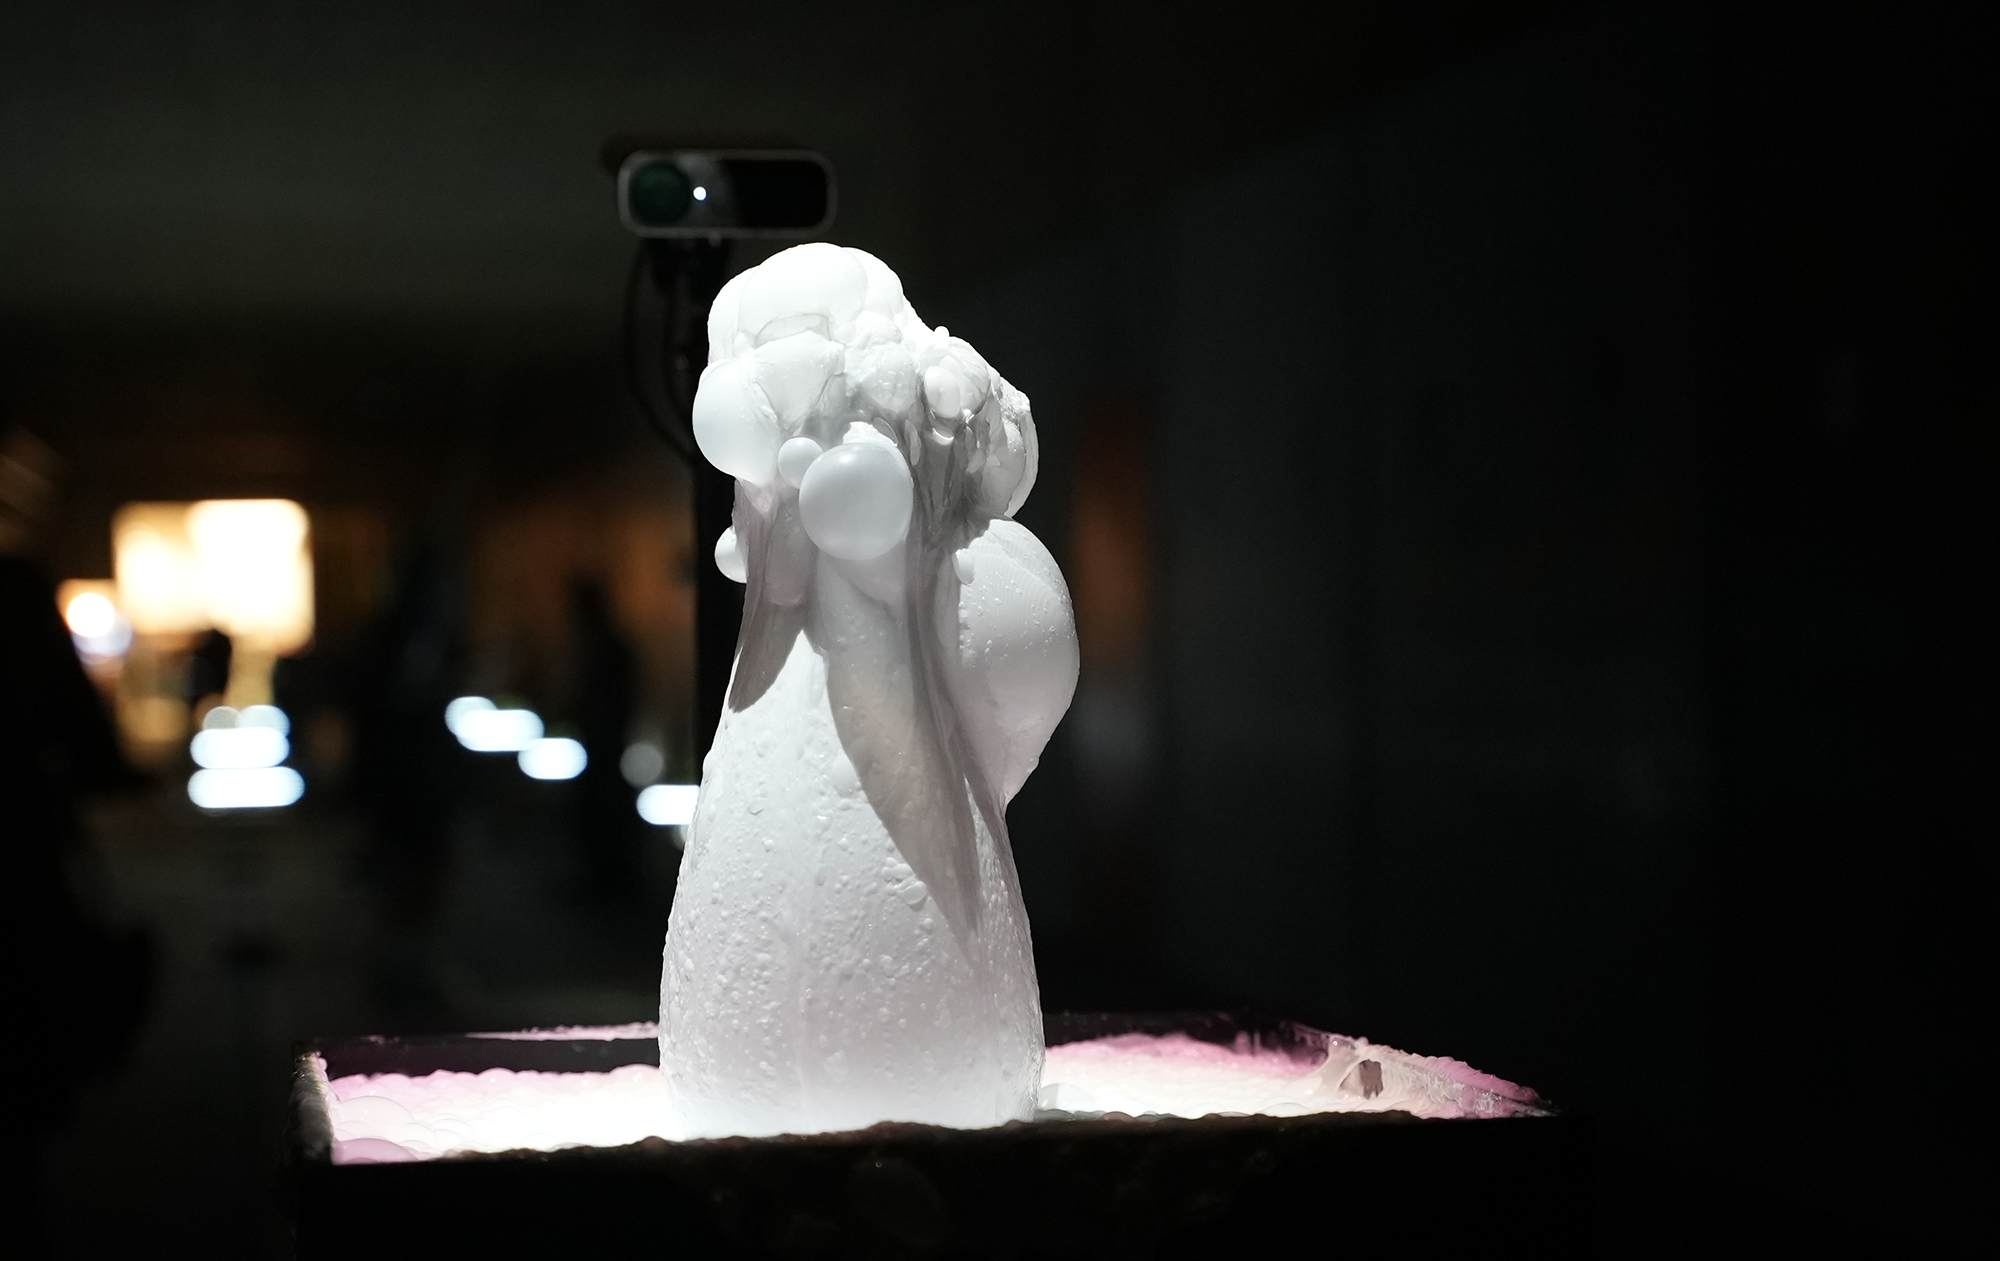 Emils　Effervescent-Material-based Interactive Life-like Sculpture